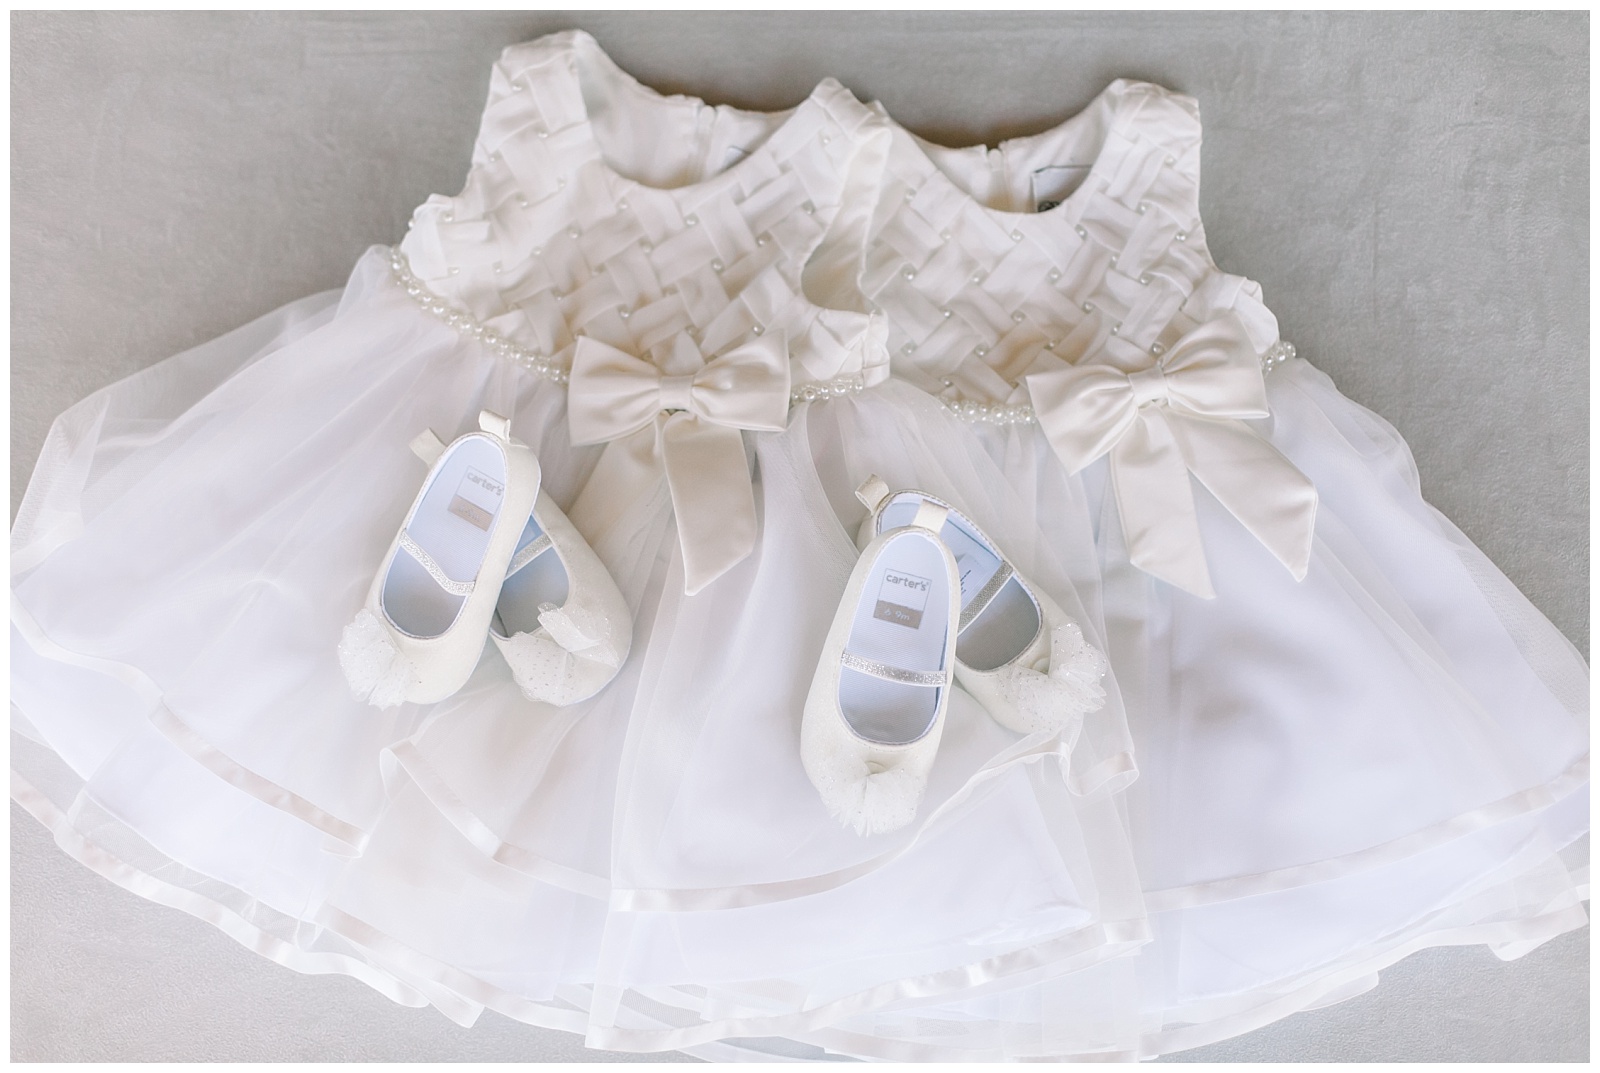 Sweet dresses for the bride and groom's two babies for a Romantic Wedding at The Allen Farmhaus in New Braunfels, TX | San Antonio-Maui-Destination Wedding Photographer | Monica Roberts Photography | www.monicaroberts.com